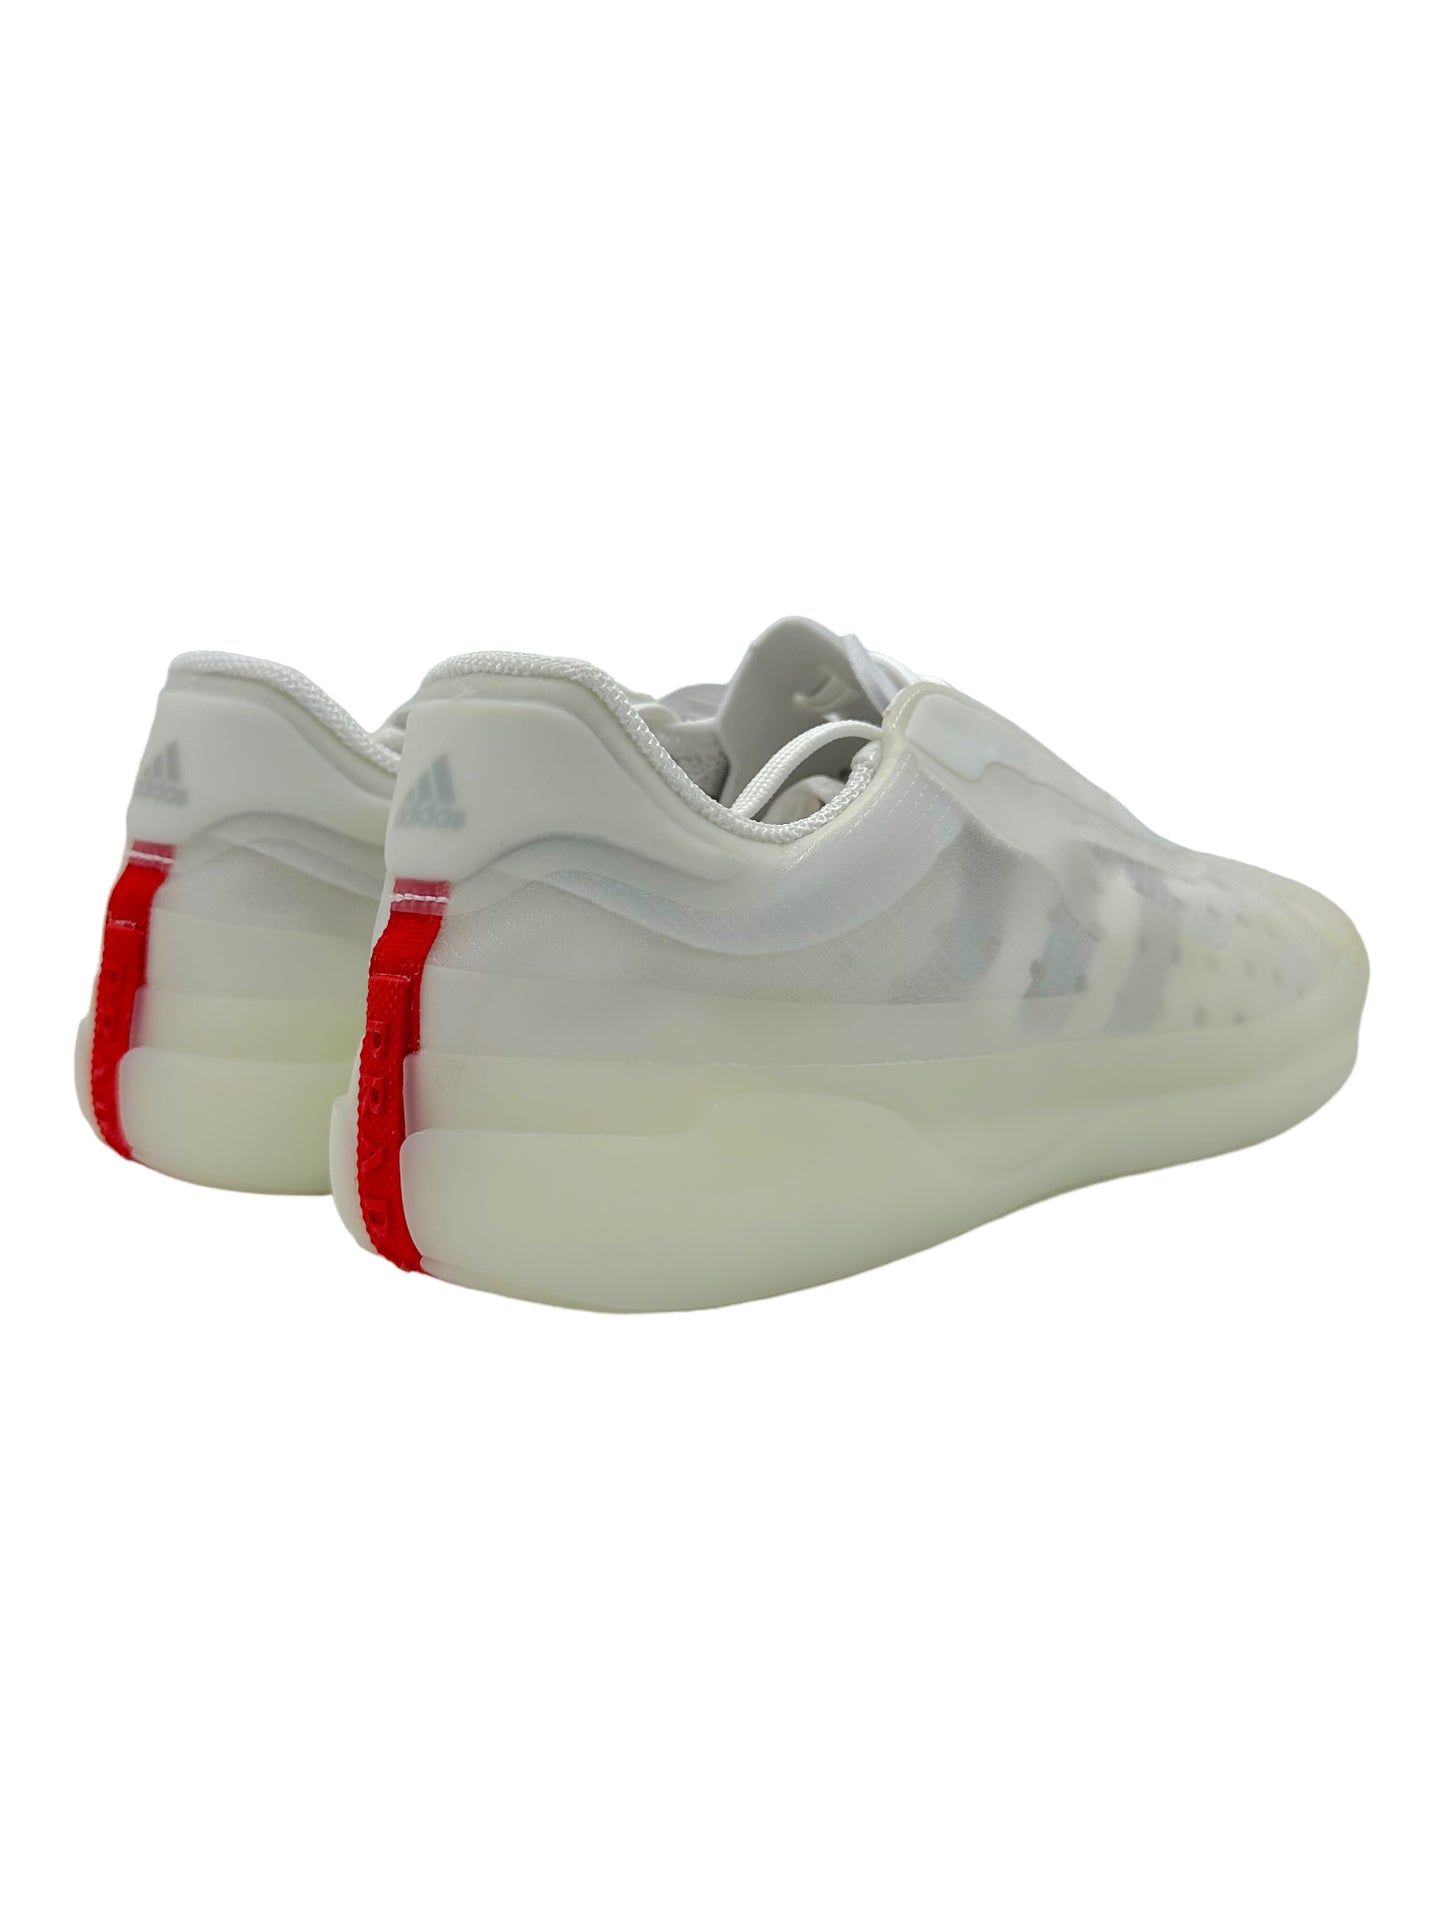 Adidas Prada X A+P Luna Rossa 21 'Cloud White' Sneakers - Genuine Design Luxury Consignment for Men. New & Pre-Owned Clothing, Shoes, & Accessories. Calgary, Canada